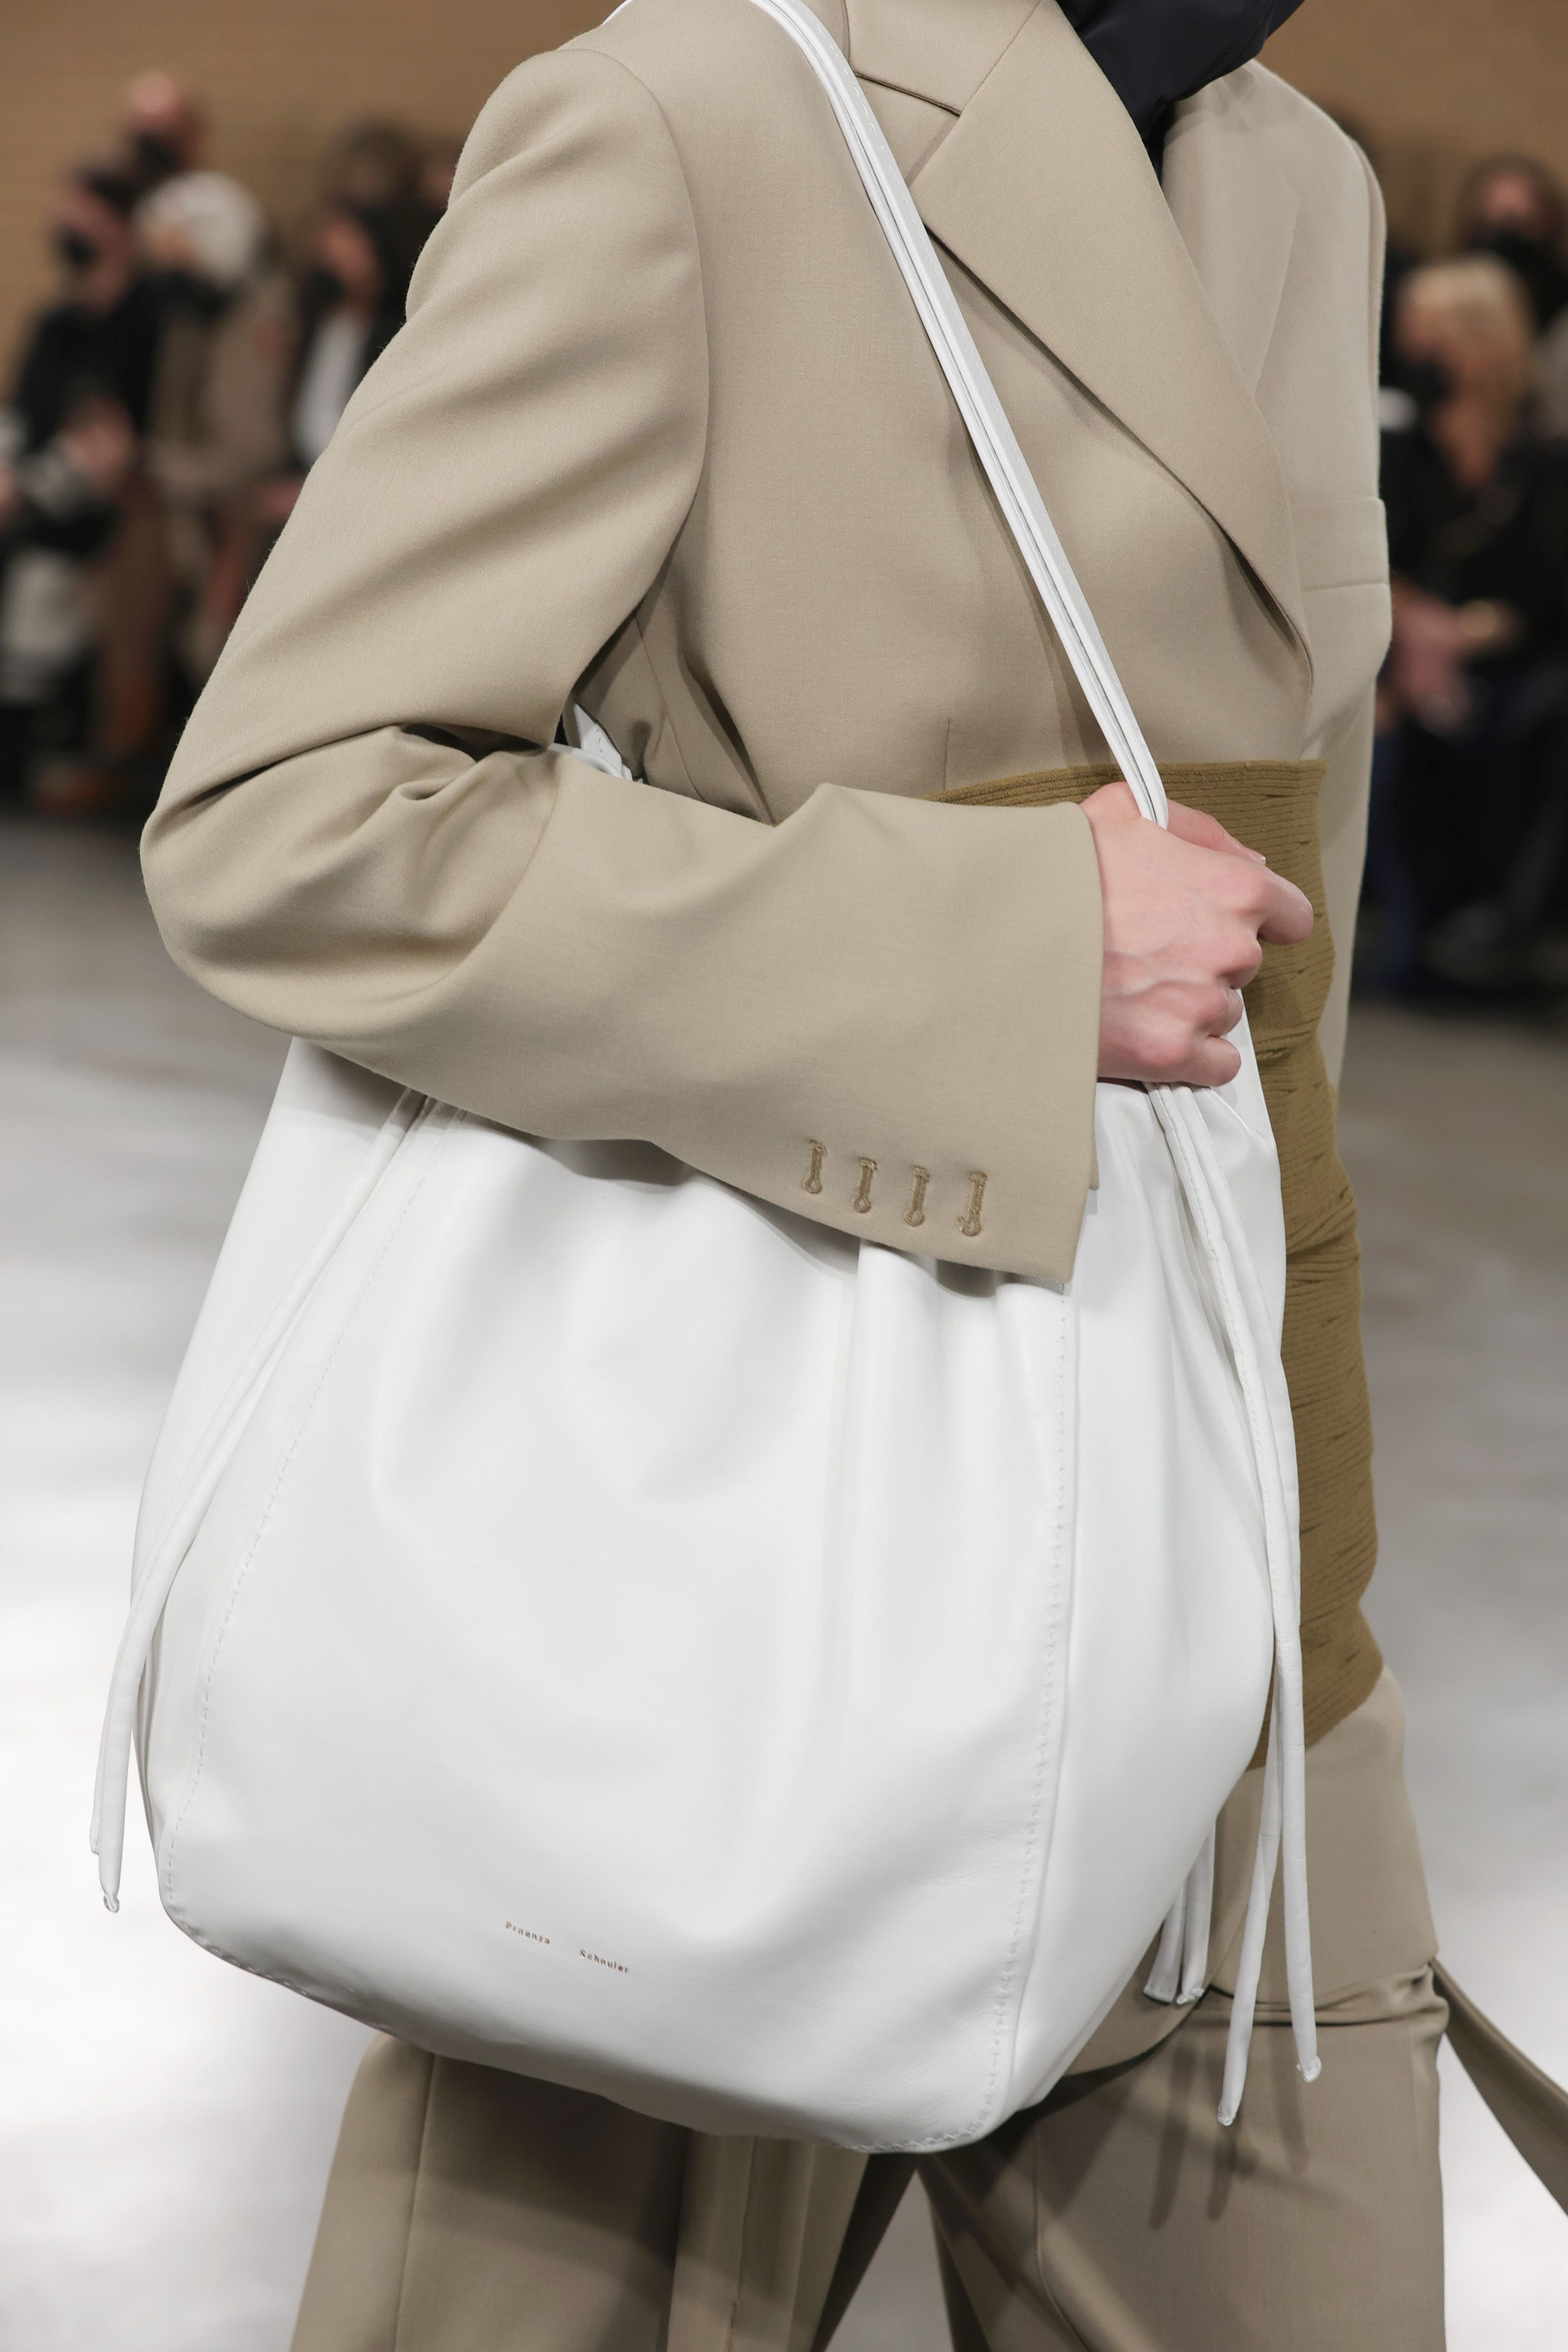 6 2022 Bag Trends to Shop — 2022 Fashion Trends